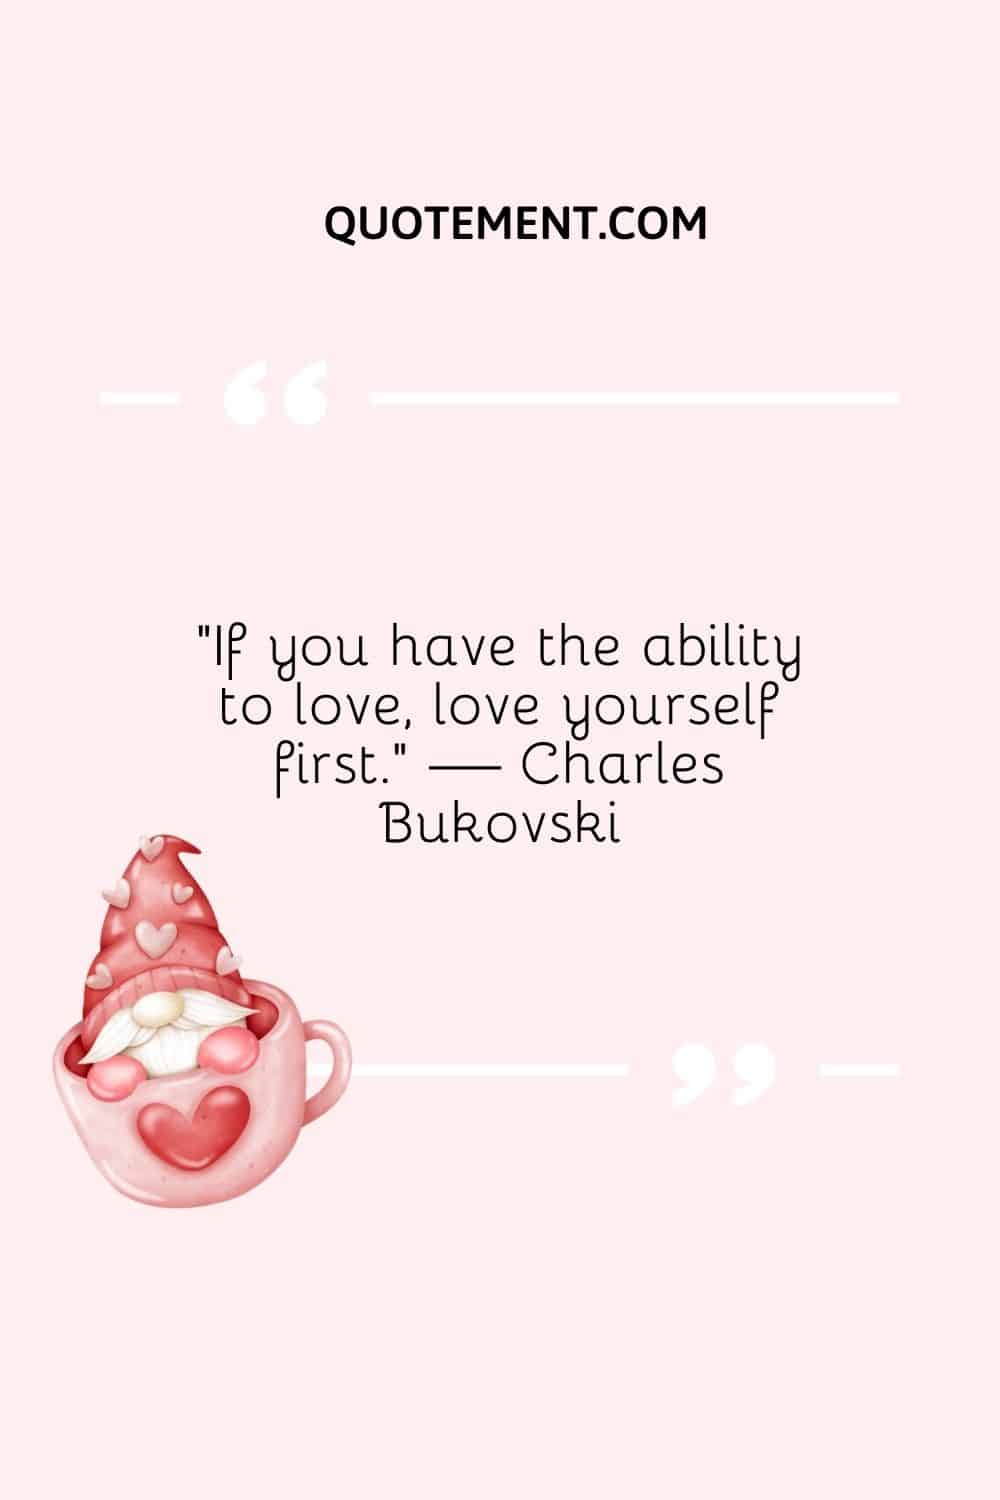 “If you have the ability to love, love yourself first.” — Charles Bukovski